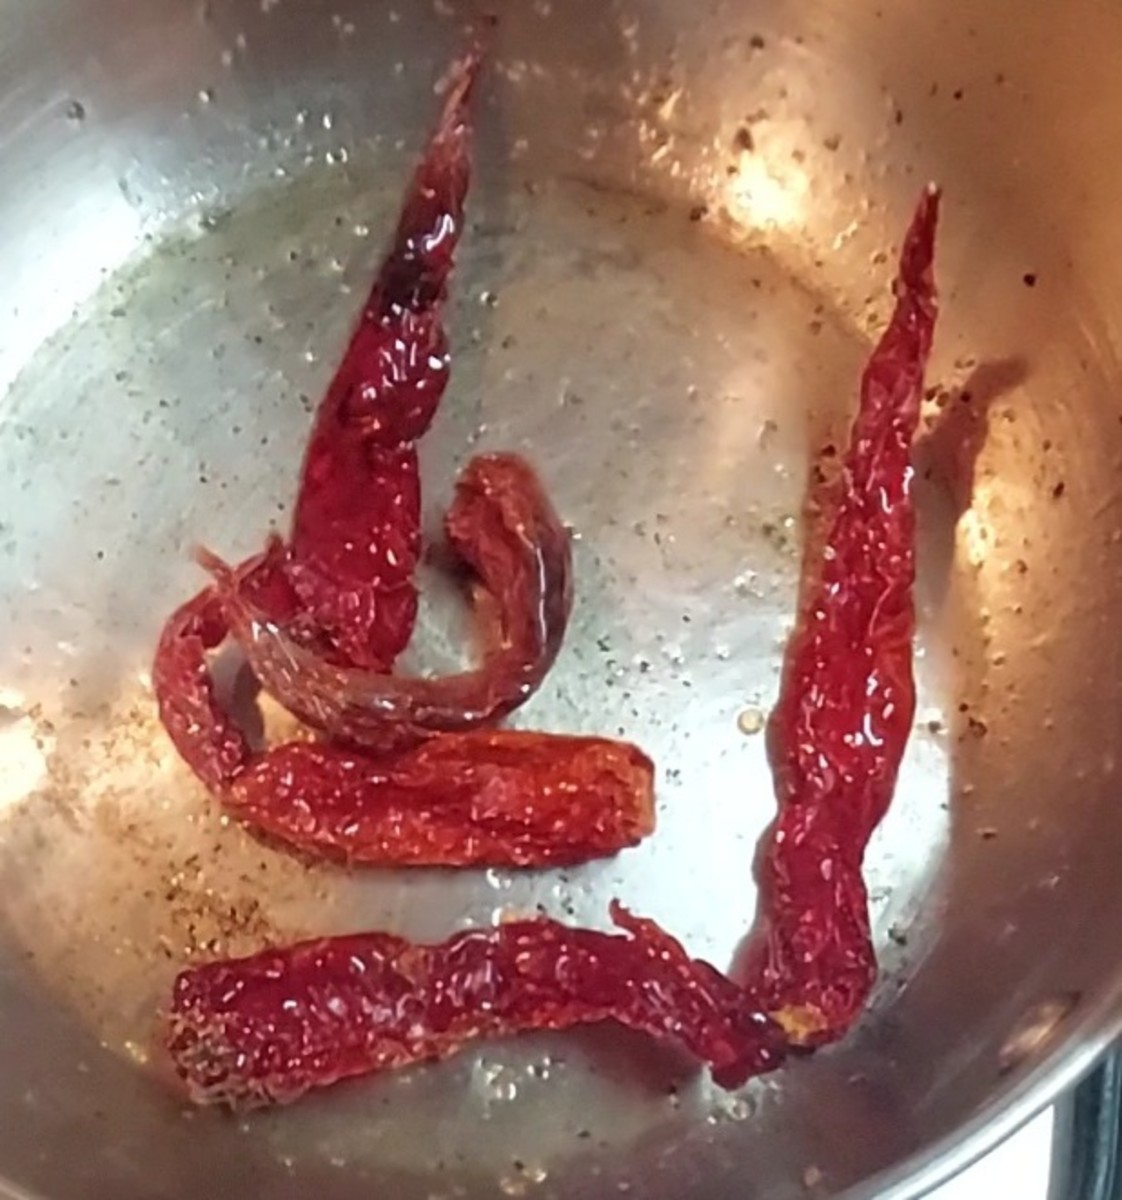 To the same pan, add 1 tablespoon of oil and fry red chilies till crispy. Set aside.